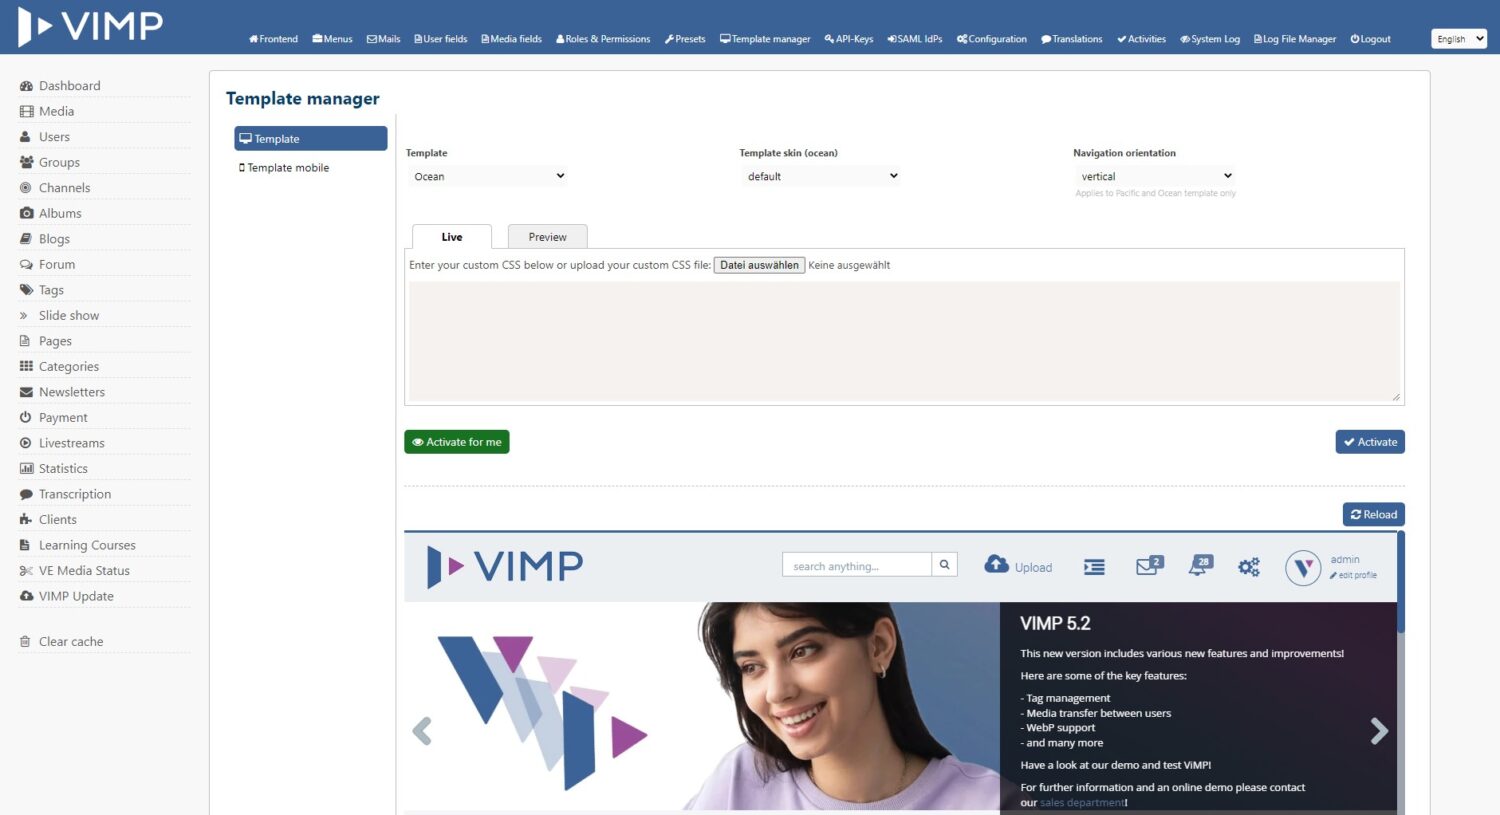 The most important innovations in VIMP 5.2